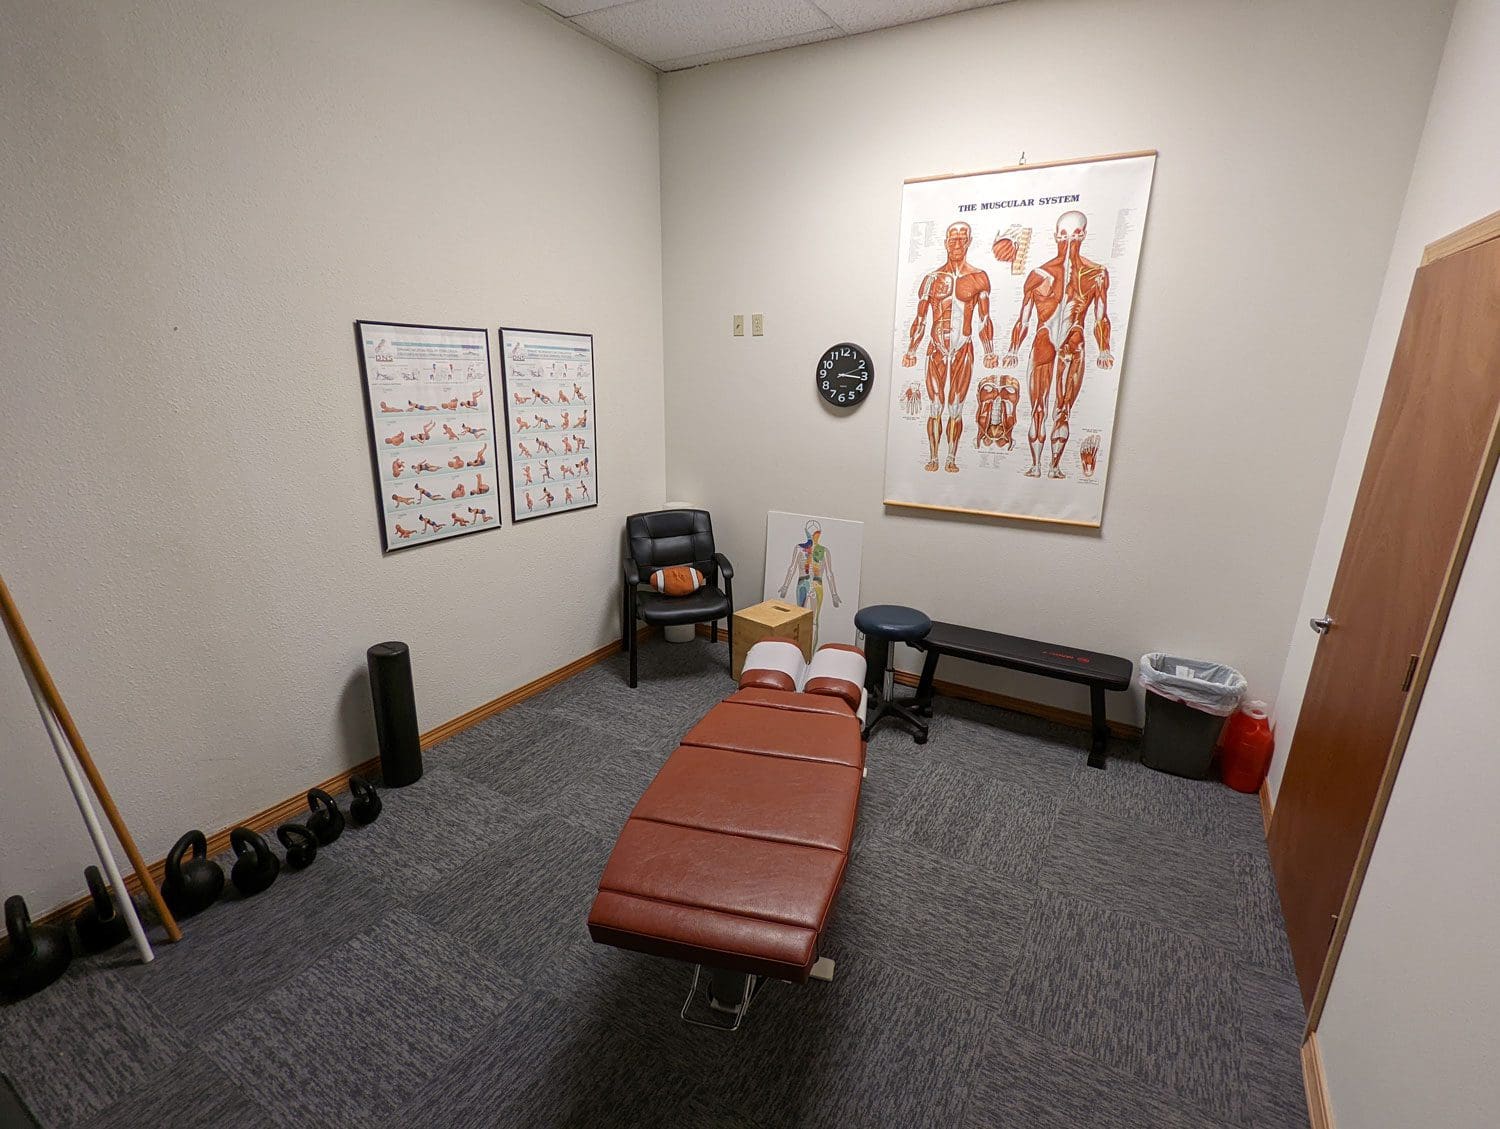 A treatment room with a chiropractic adjustment table at Beaverton Chiropractic clinic.